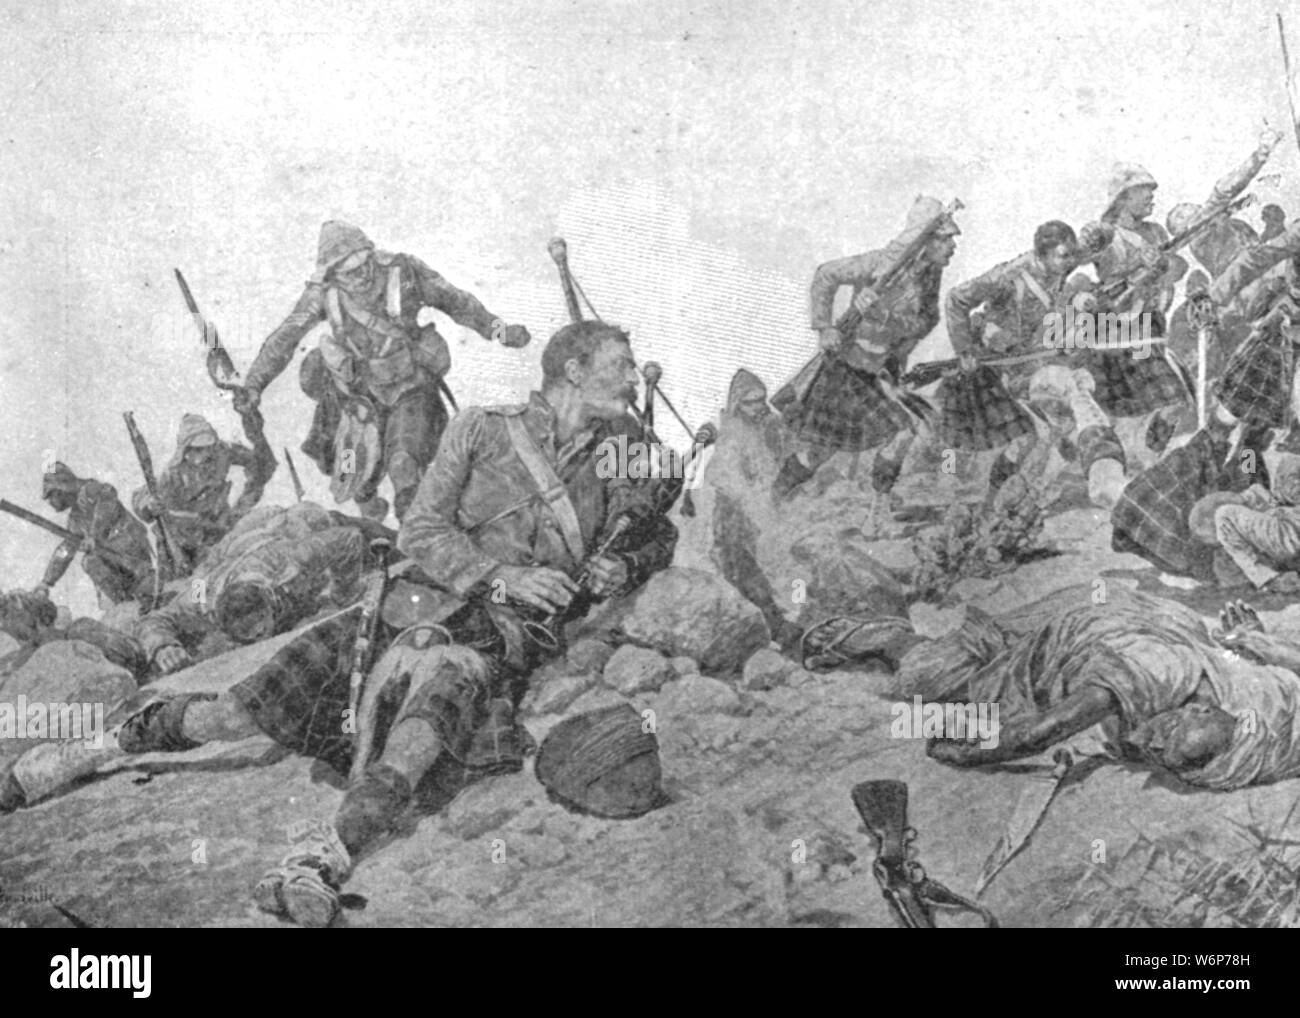 'The Indian Frontier War, 1897: The Storming of the Dargai Ridge by the Gordon Highlanders, October 20', (1901). Fighting between British troops and Afridi tribesmen on the North-West Frontier (a province of British India and later of Pakistan), during the Tirah Campaign. Four Victoria Crosses were awarded after the action. One of the recipients was piper George Findlater who continued to play to encourage his battalion's advance, despite having been wounded. From &quot;The Illustrated London News Record of the Glorious Reign of Queen Victoria 1837-1901: The Life and Accession of King Edward V Stock Photo